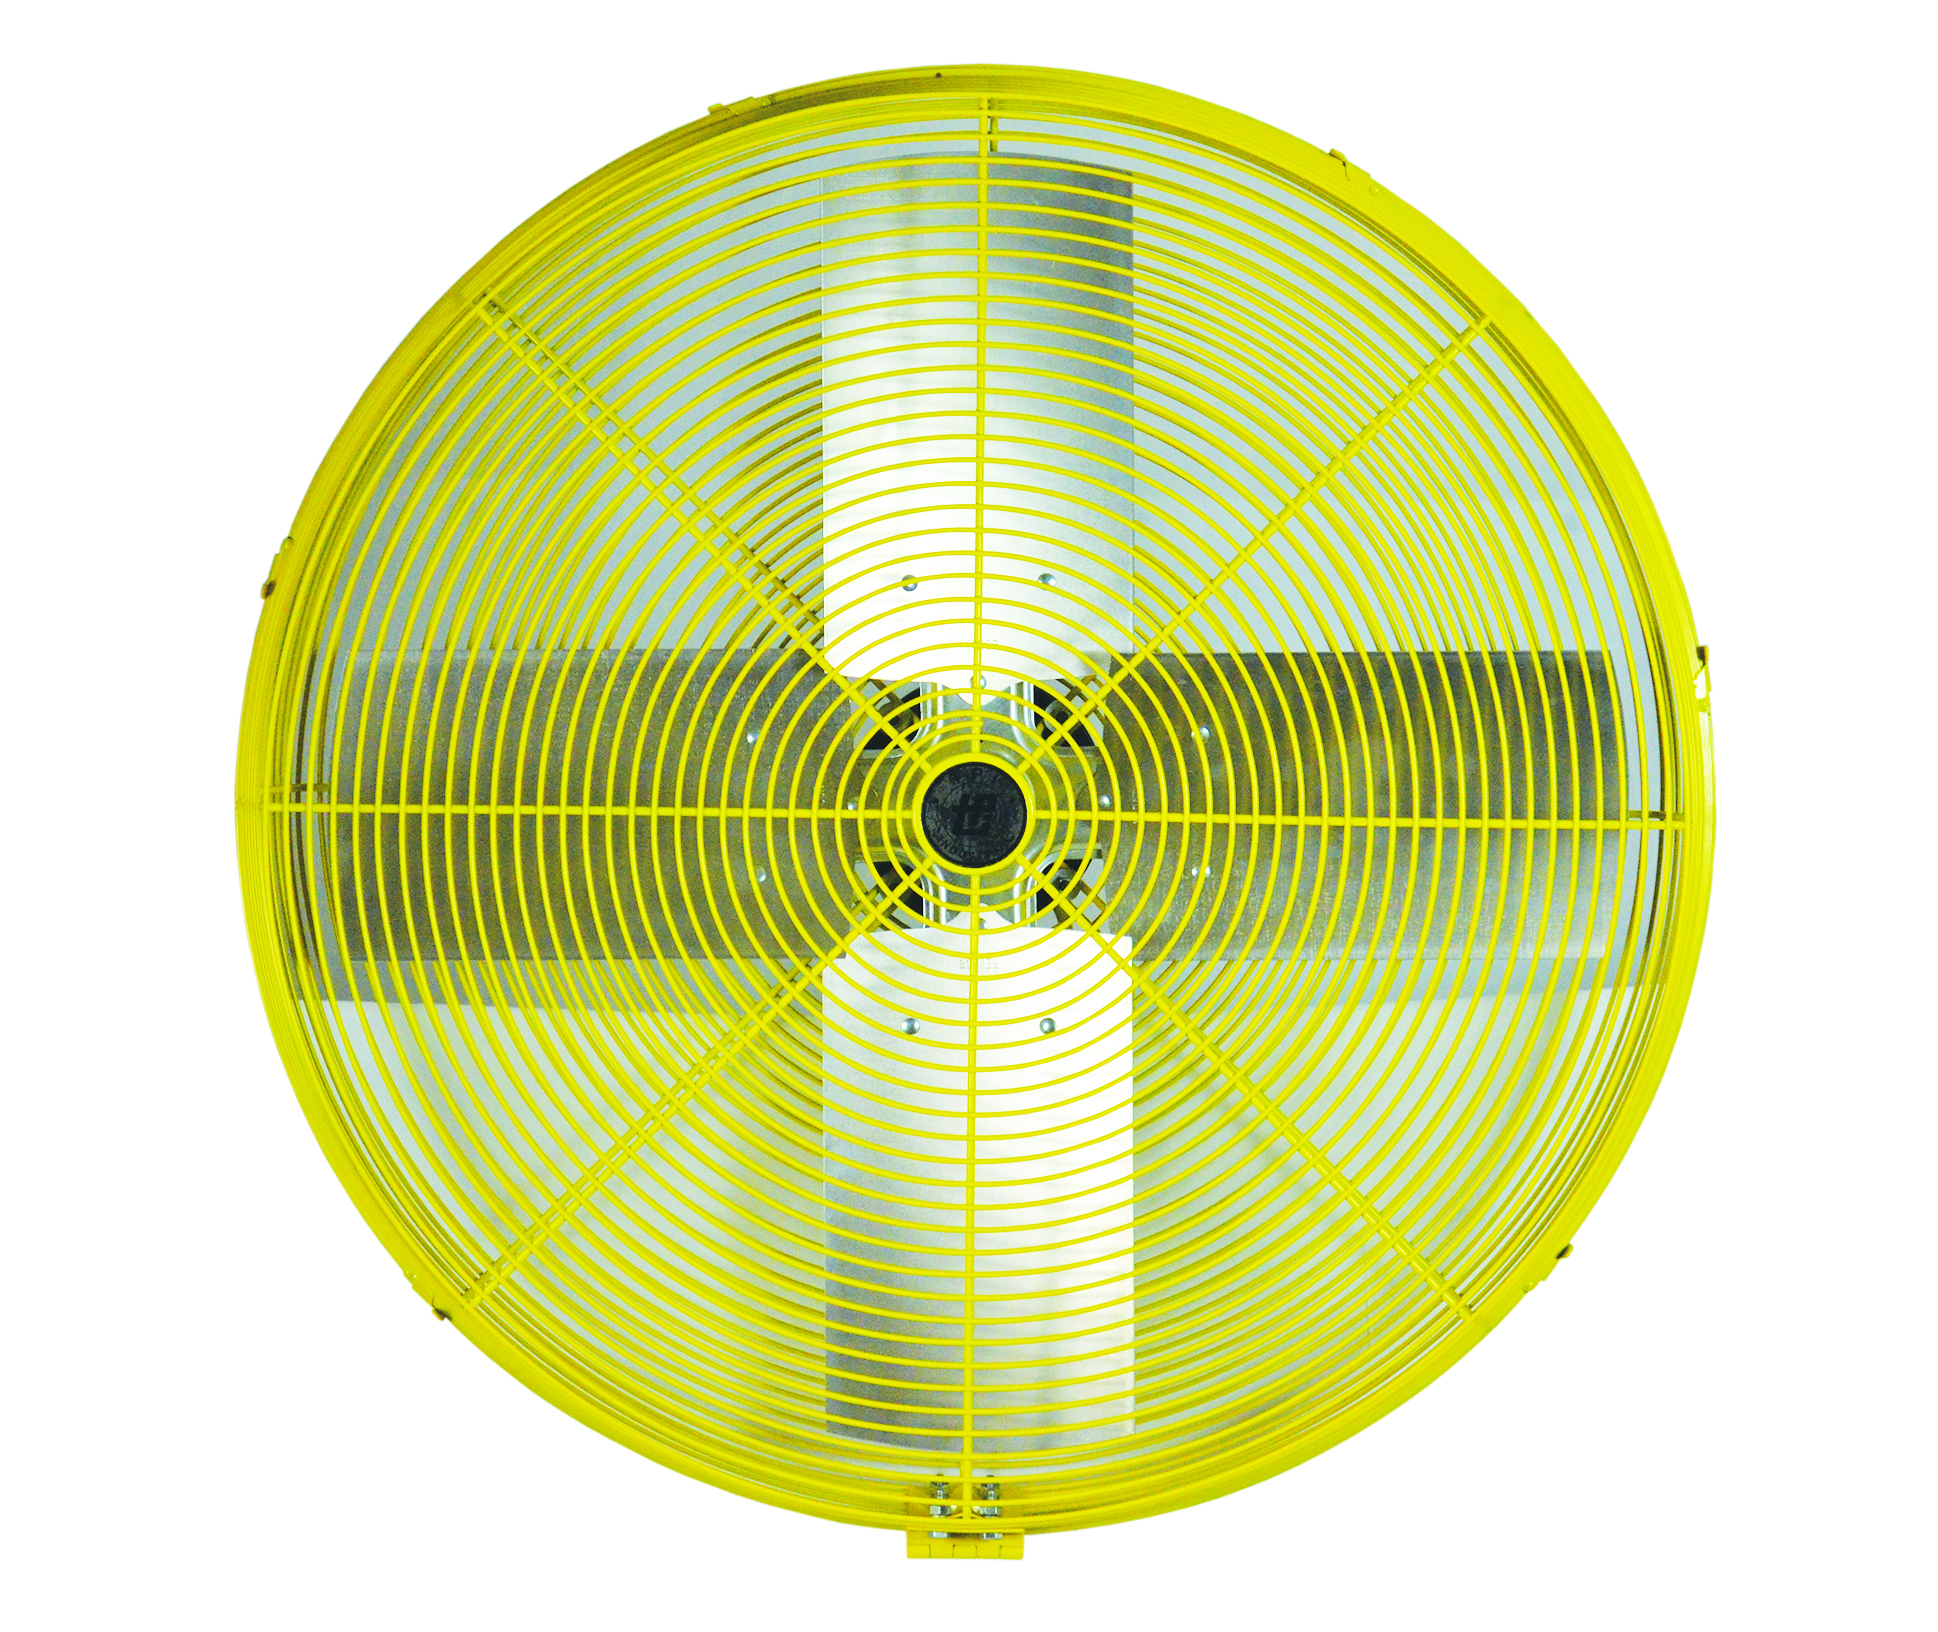 24 IN Industrial Assembled Maximum Duty Fan Head, Size- 27 IN, CFM 5600 (High) 4900 (Low), 1/2 HP, 3.5 AMP, Speed- 1100 (High), 800 (Low) RPM, 120 V, 2 Speeds, Yellow